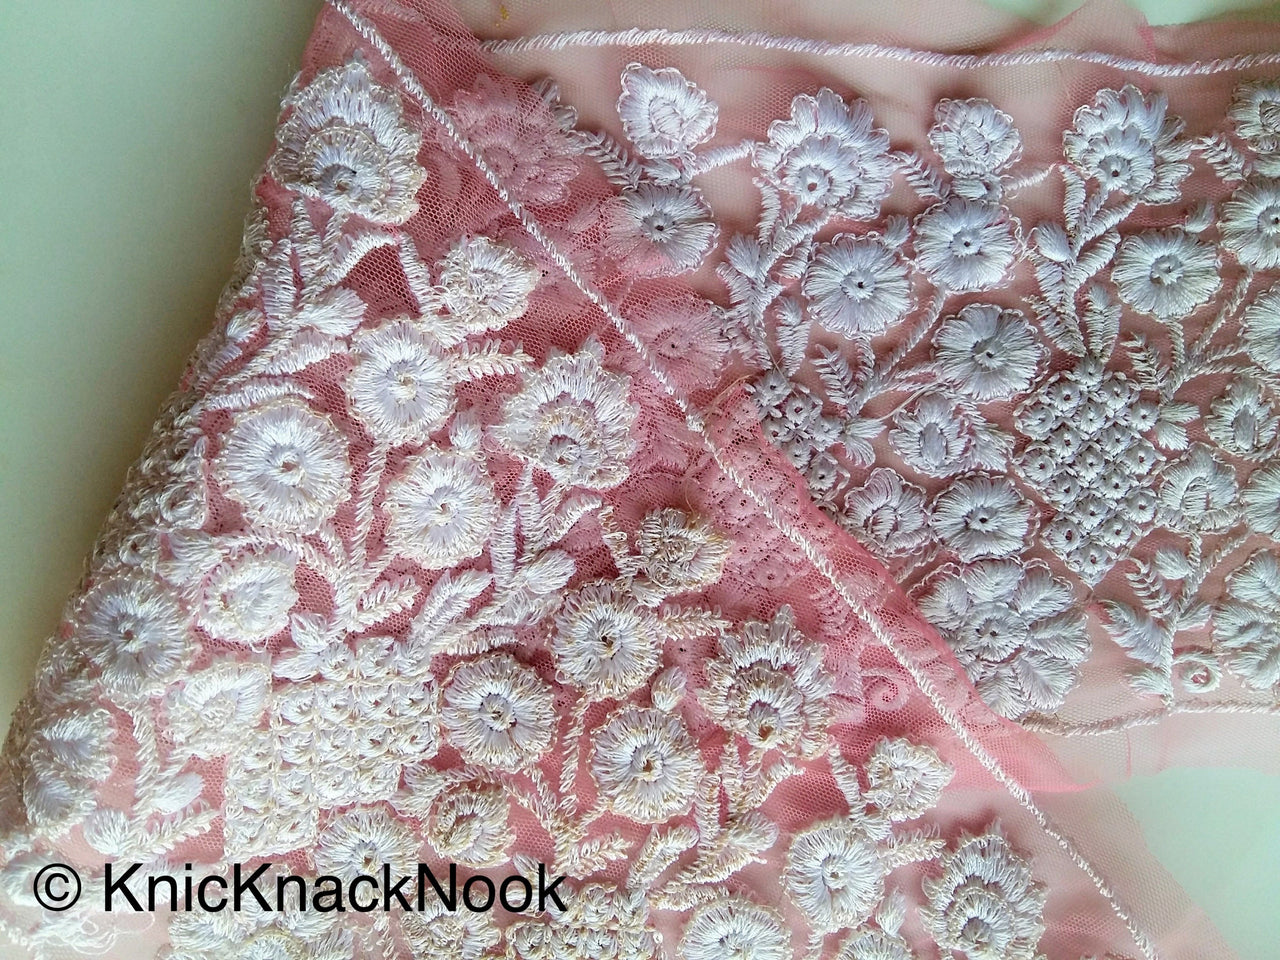 Pink Net Lace Trim With Embroidered White Flowers, Approx. 15cm Wide - 200317L174